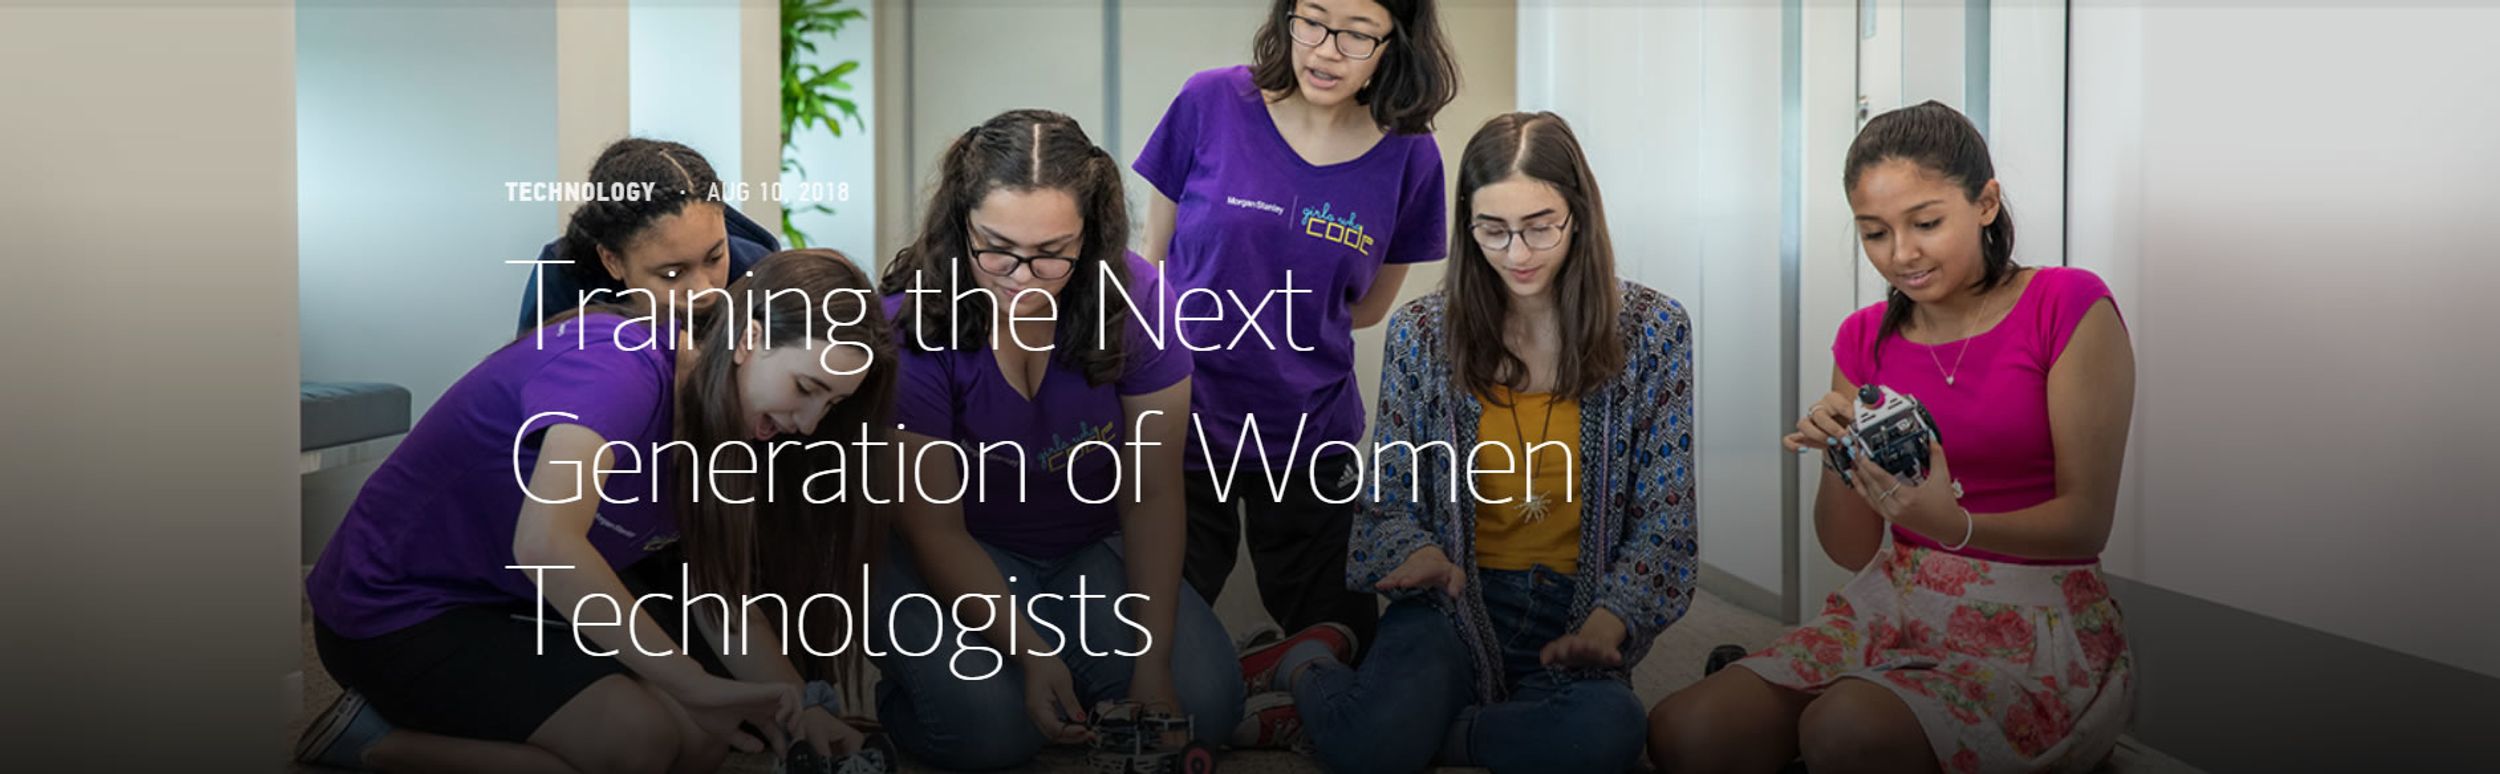 Training the Next Generation of Women Technologists